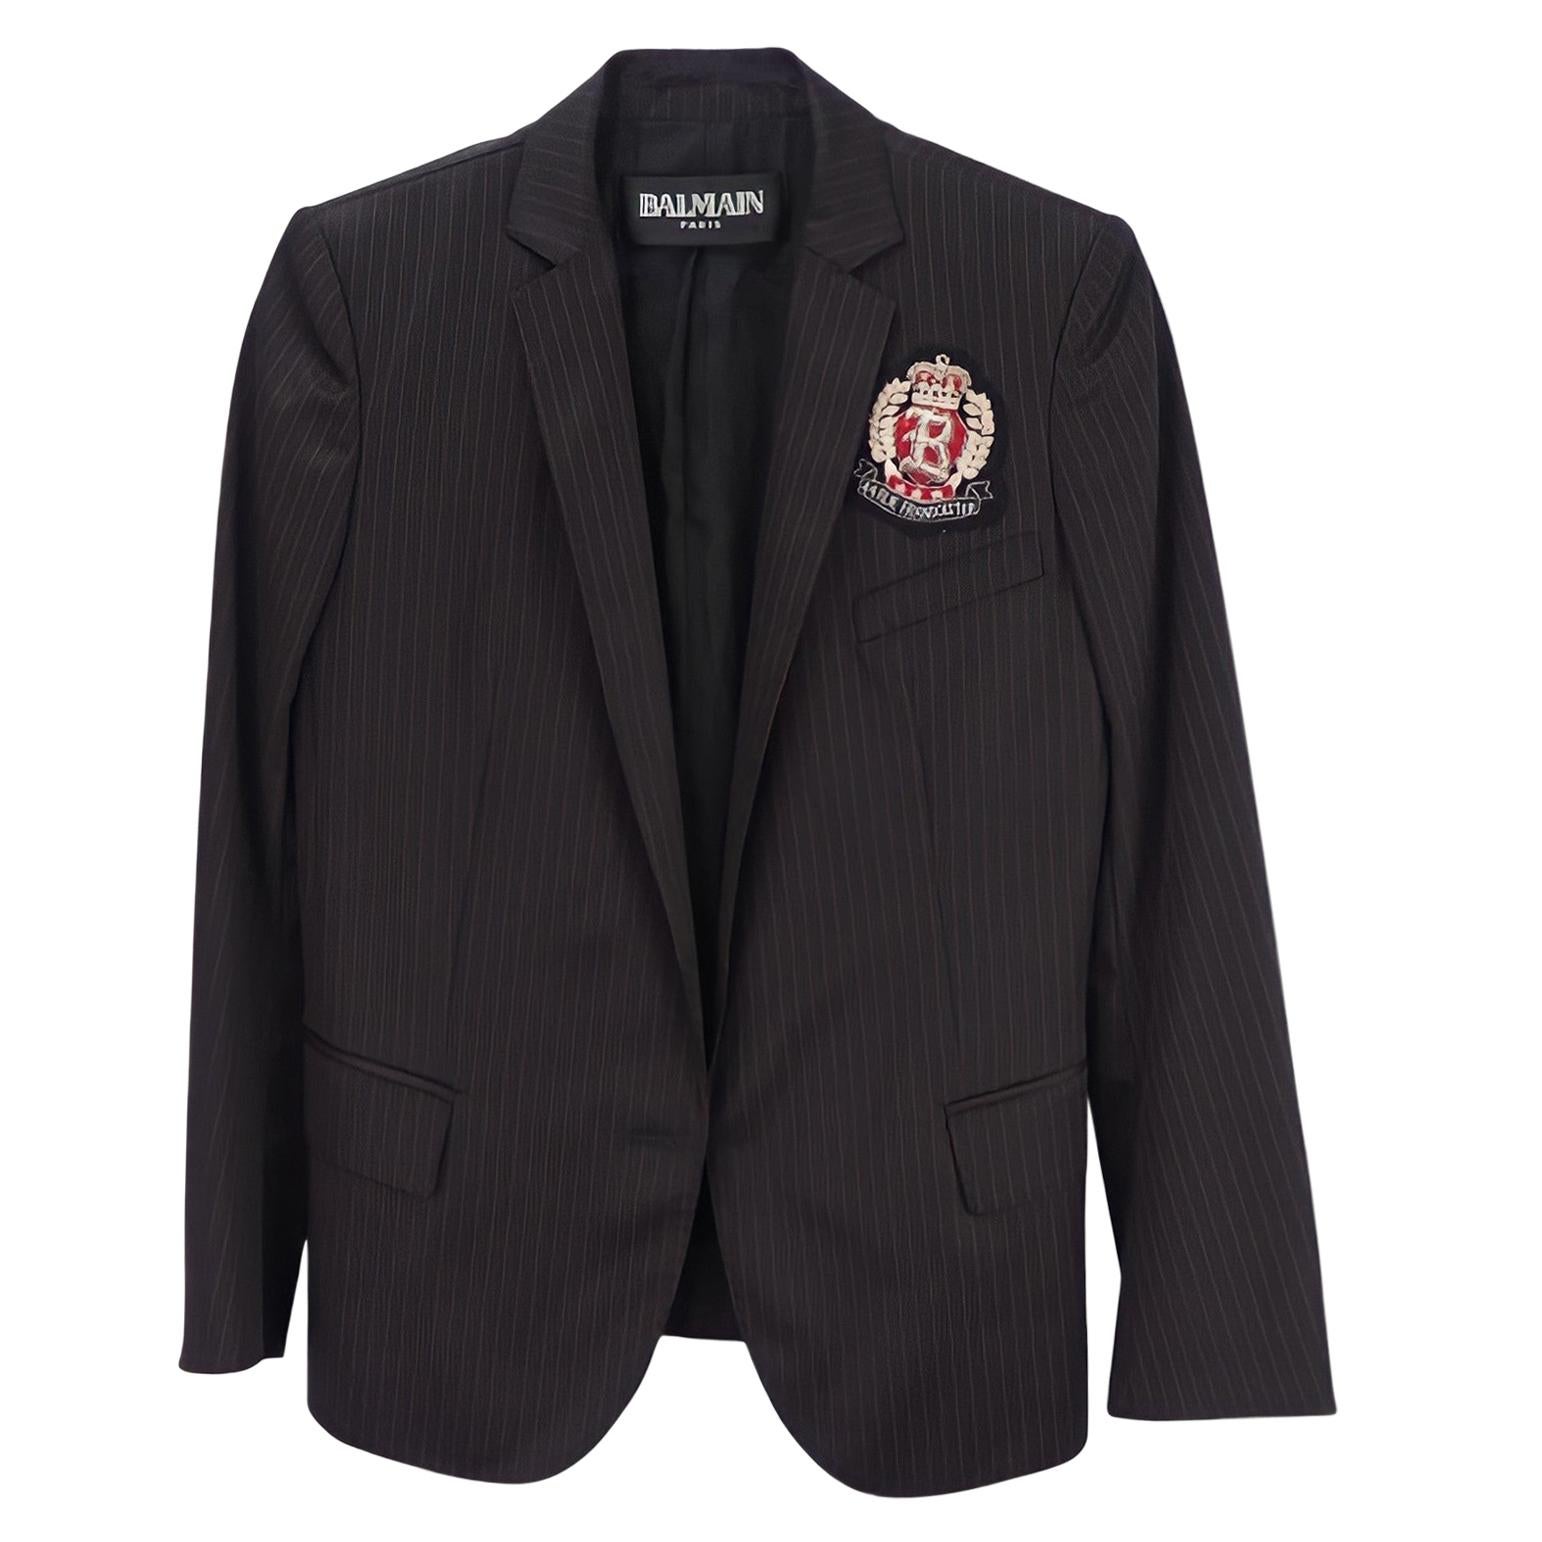 Balmain Blazer in Black Wool with Fine Red Stripes (Size 36) Extra Small